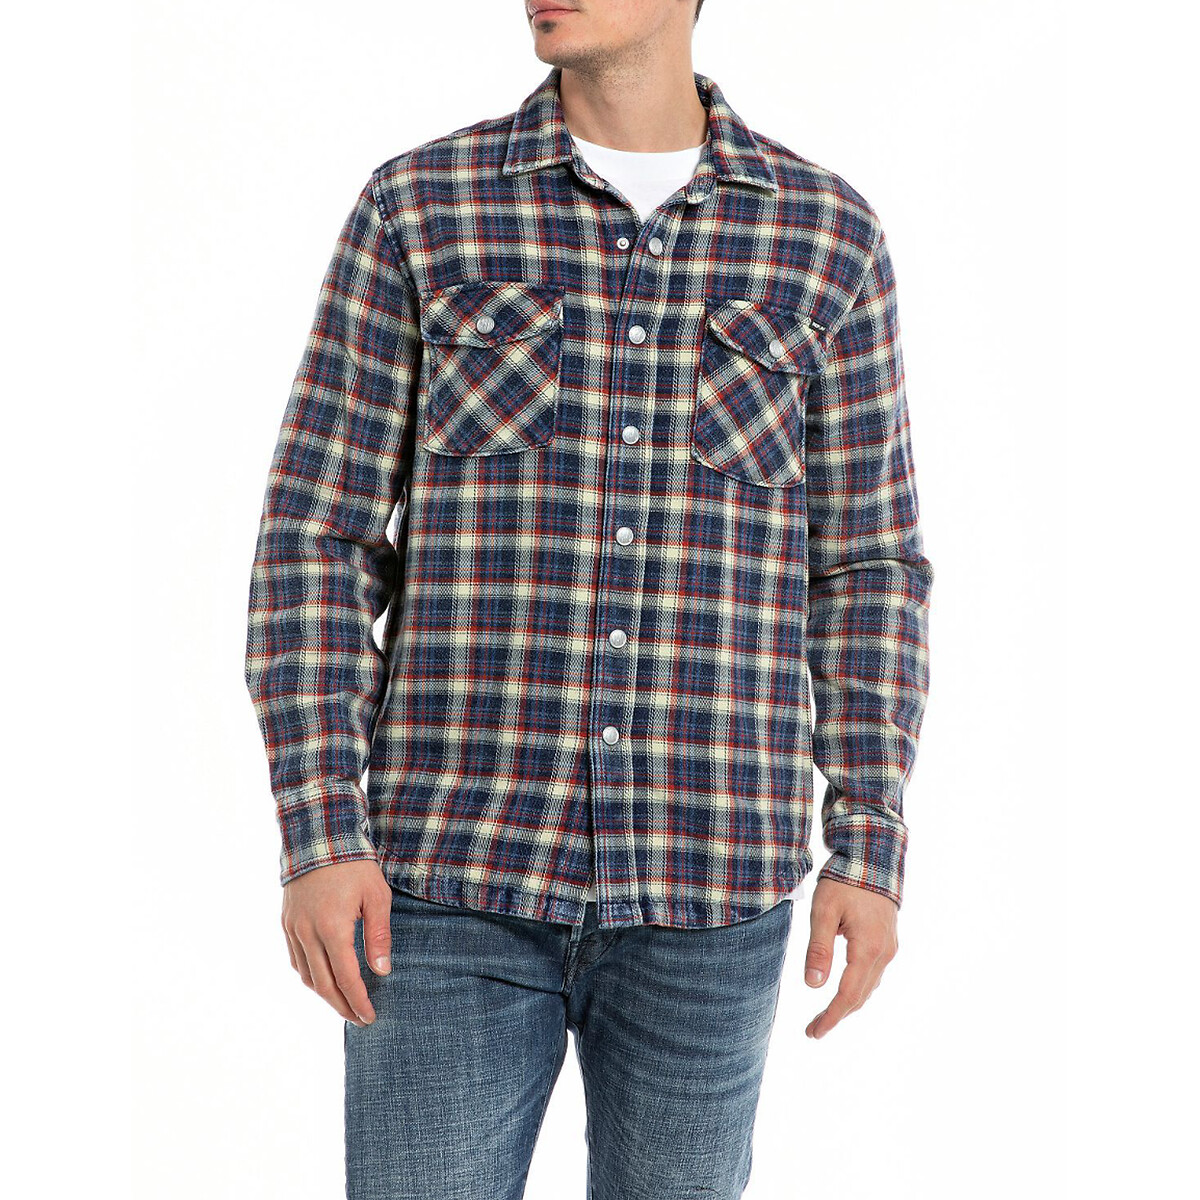 Checked Cotton Shirt in Regular Fit with Long Sleeves